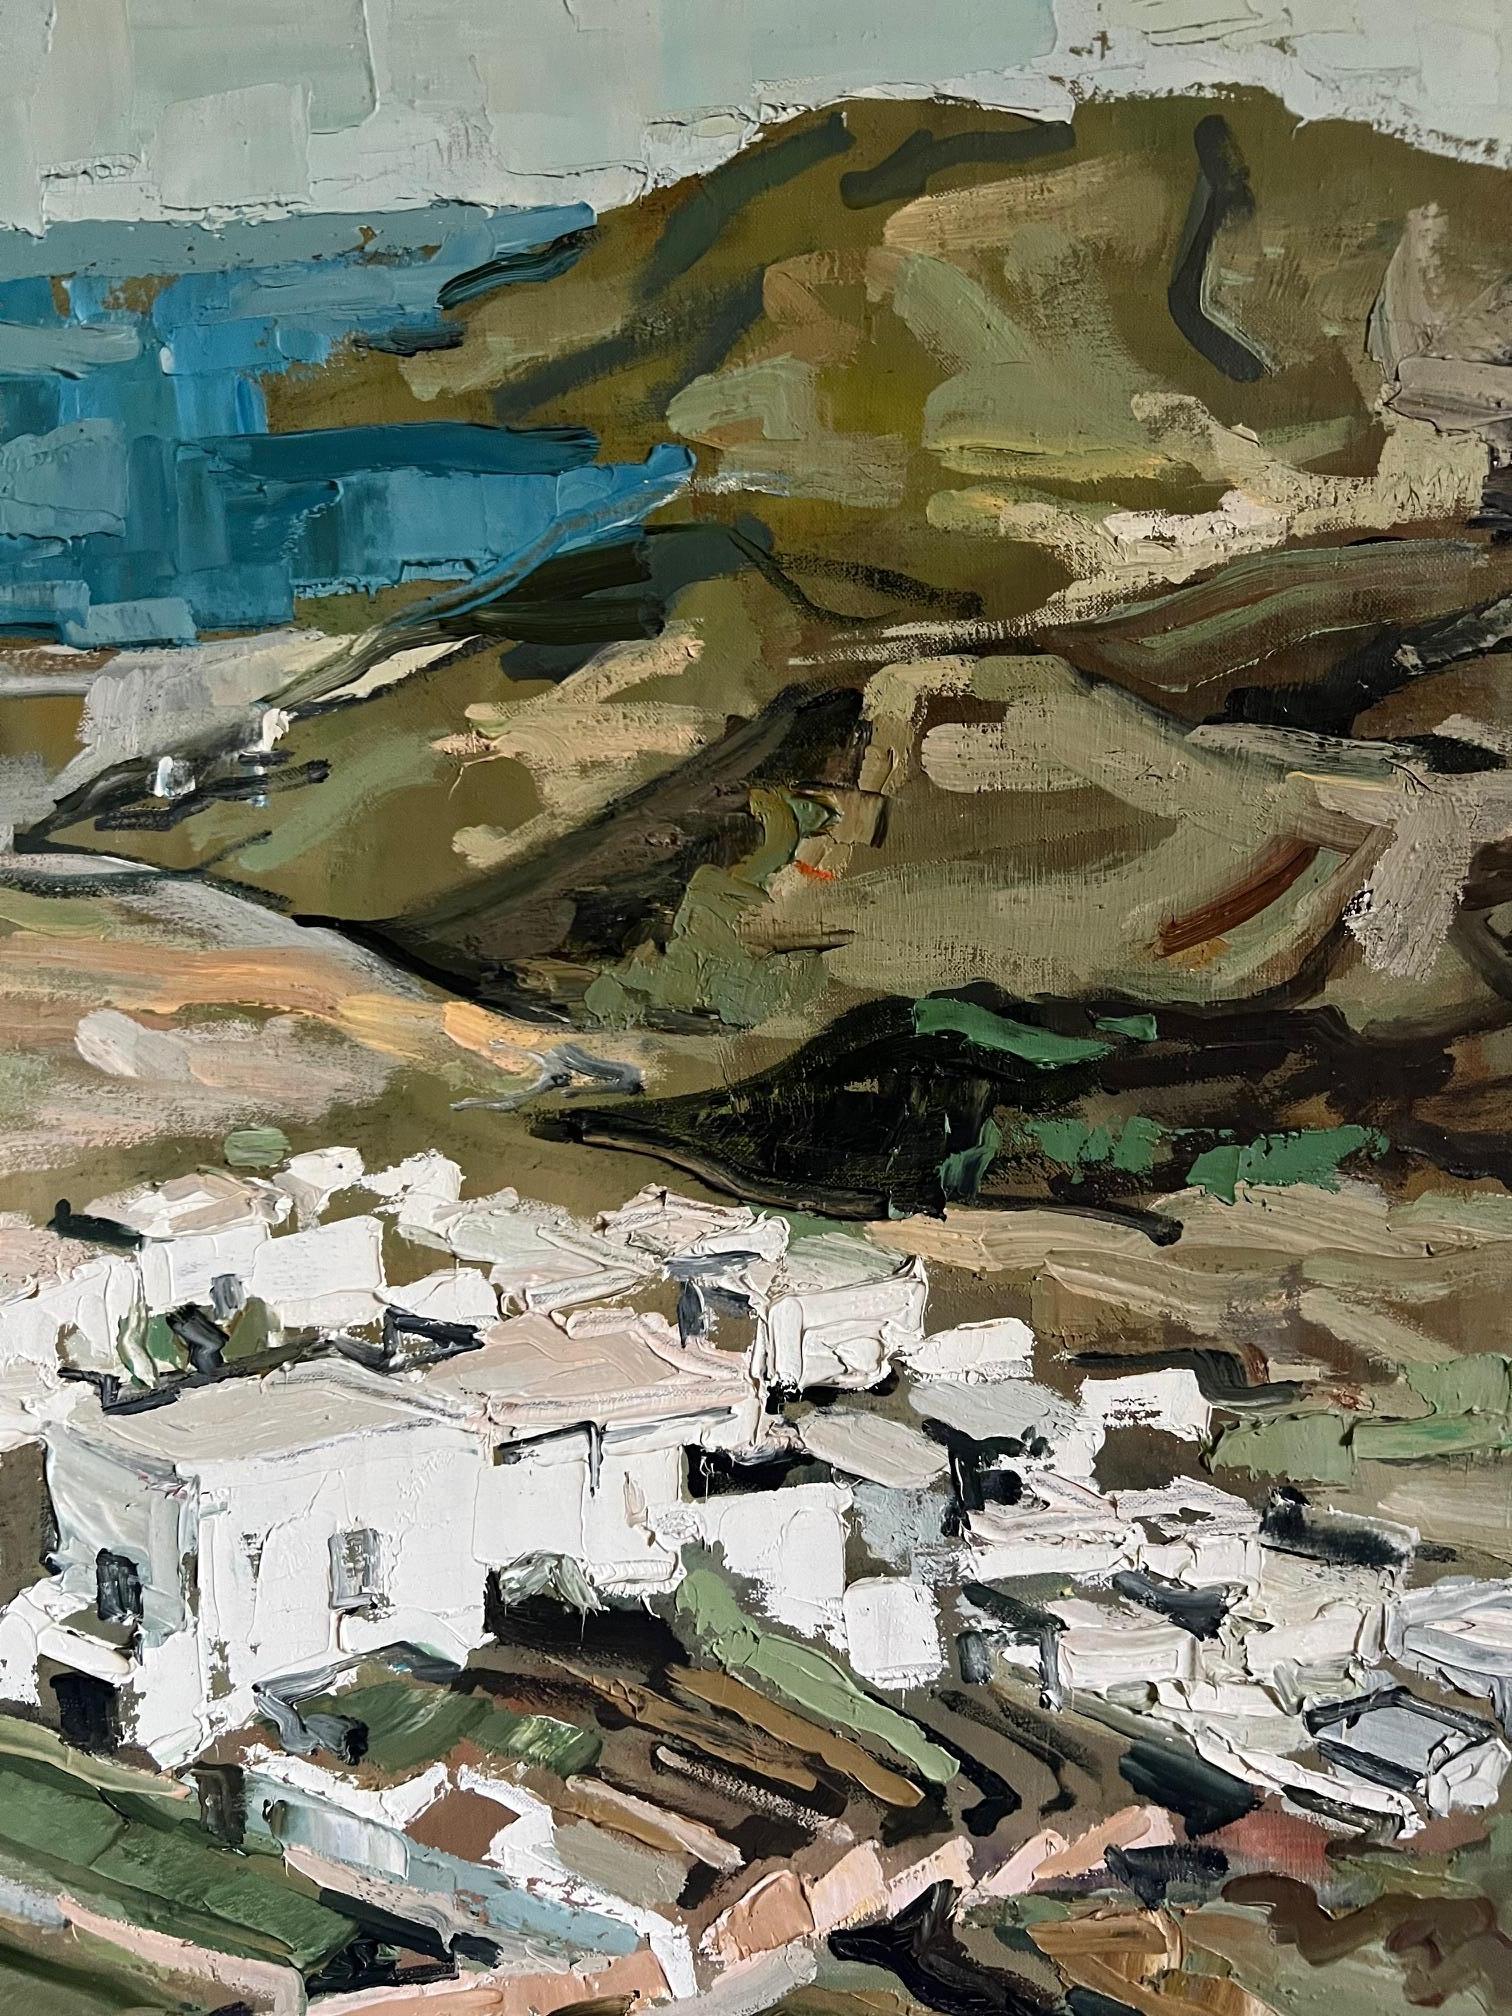 Oil on canvas by Renee Theobald (1926-2014), titled Greek Village, signed by the artist and framed. 

Renee Theobald was a French Postwar & Contemporary painter known for palette knife impressionist painting, landscape and coastal scenes.

Painting